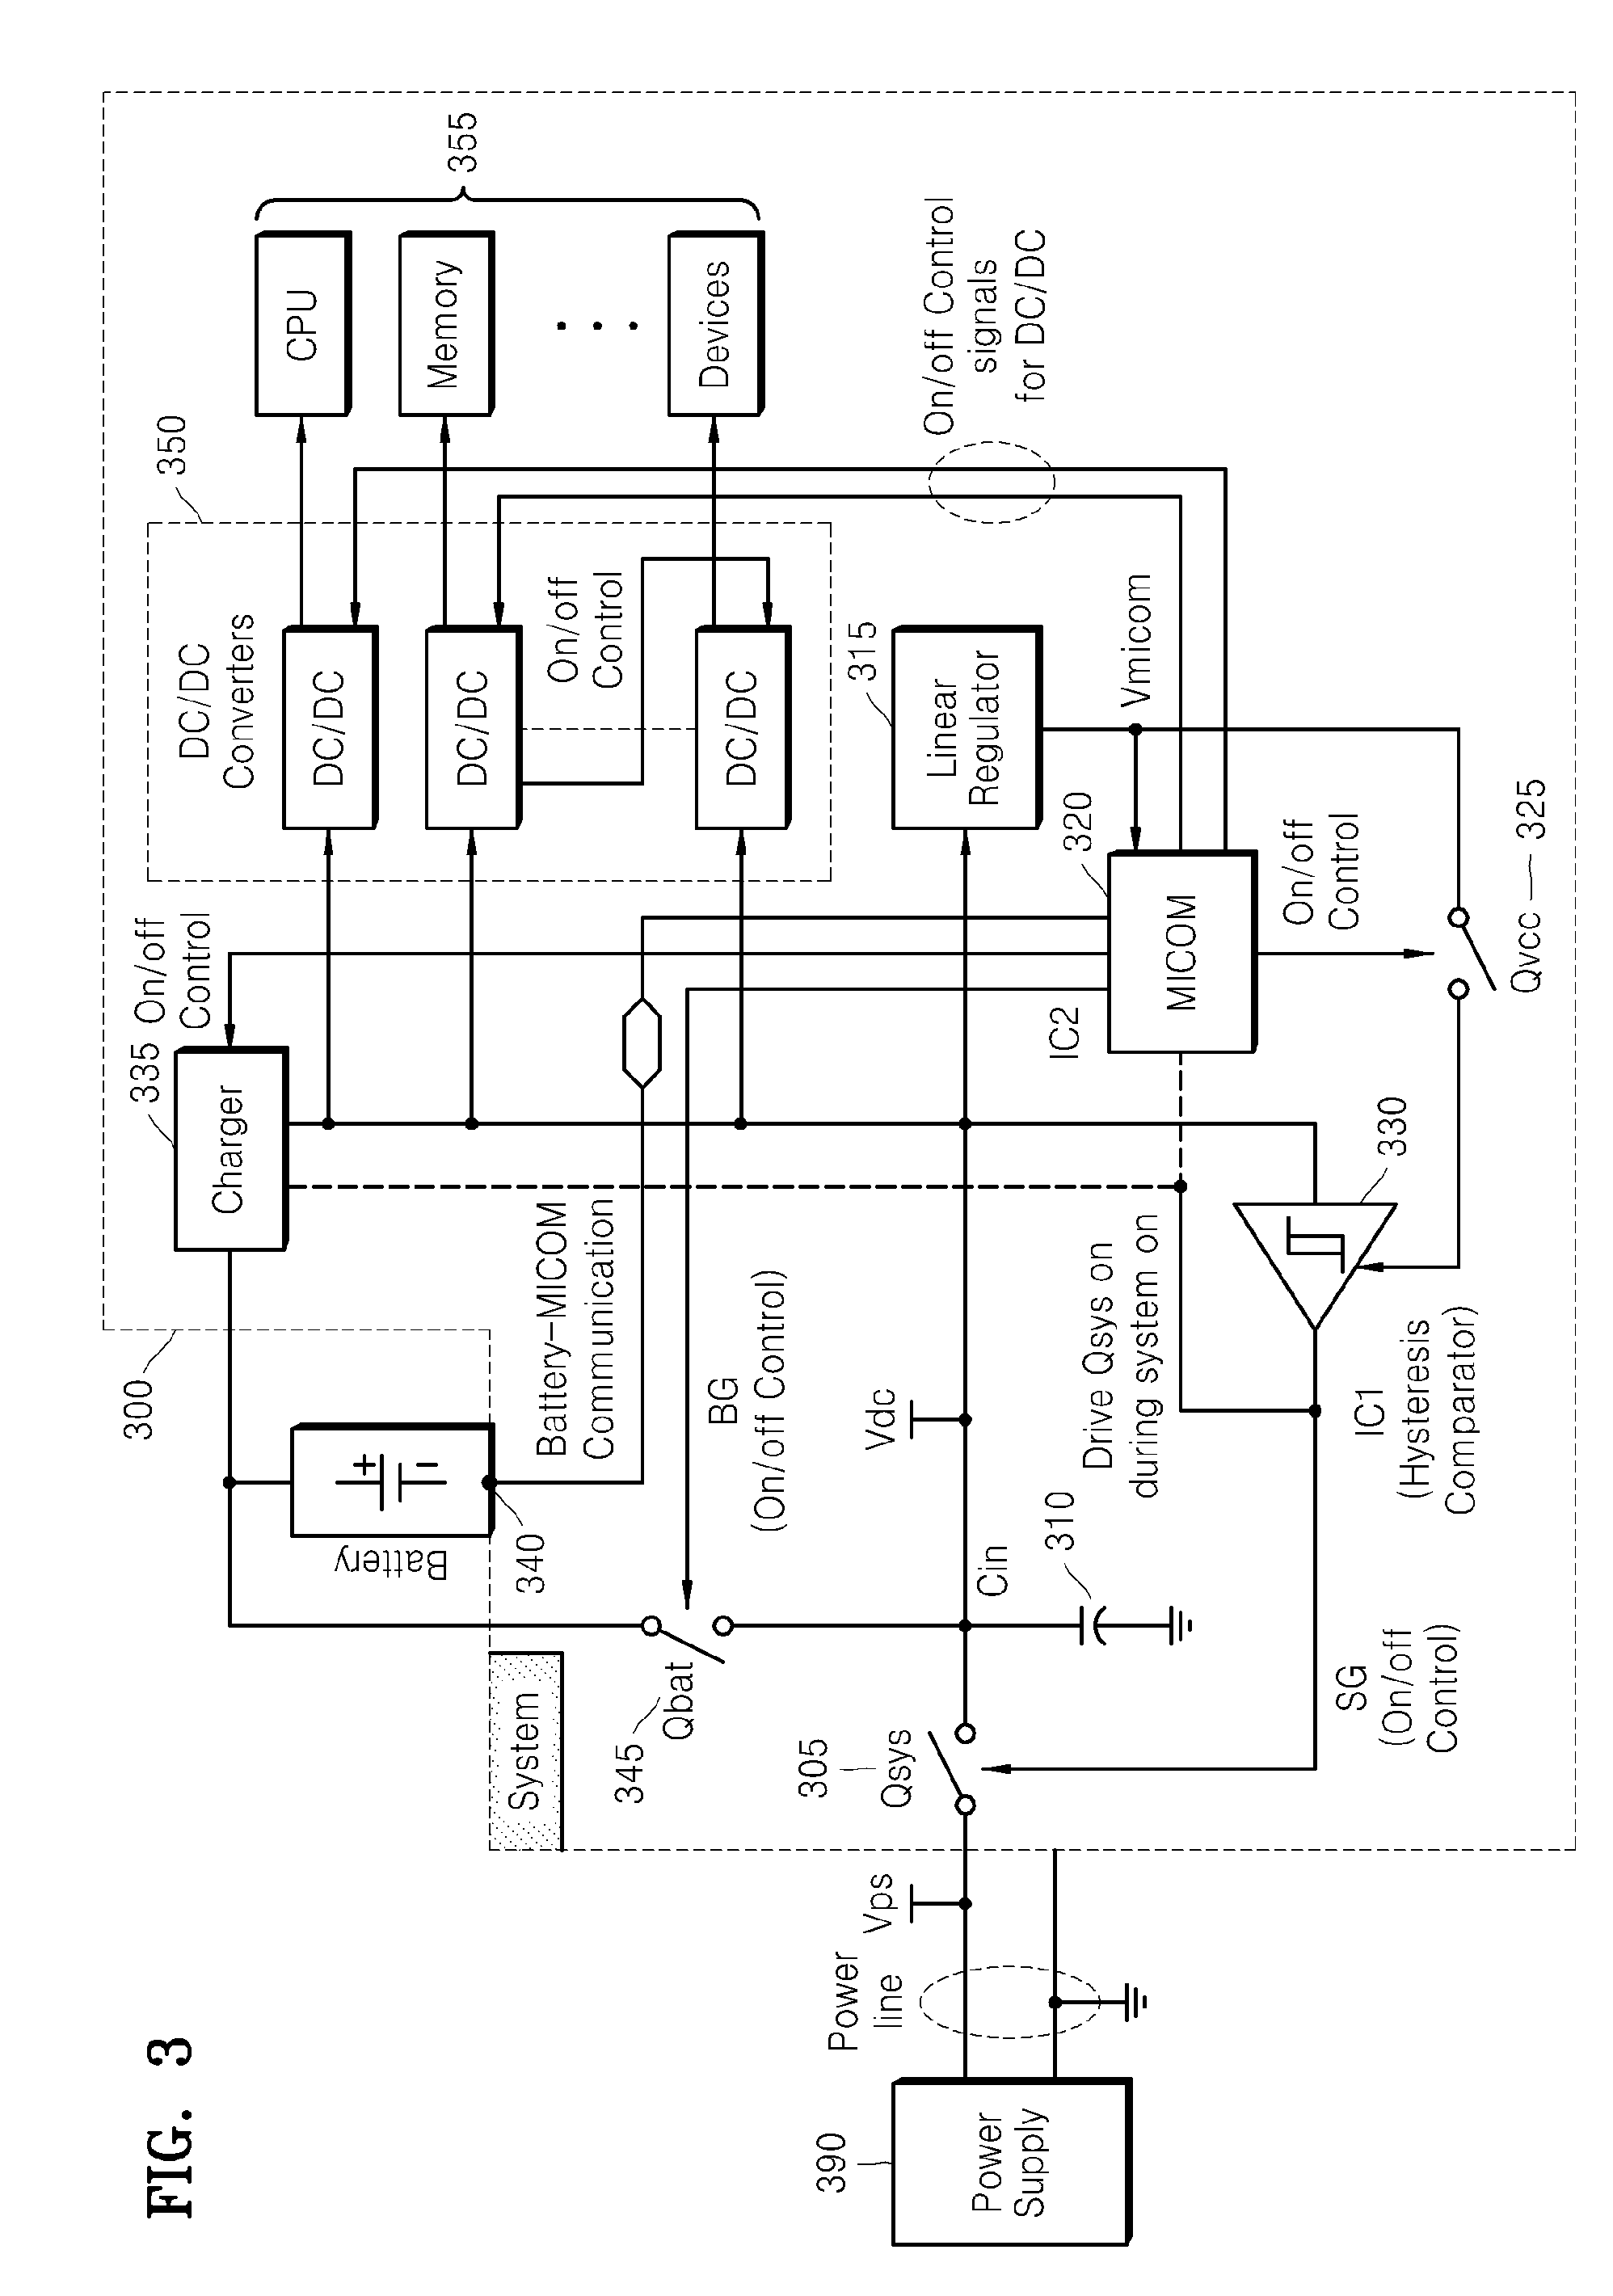 Power management method and apparatus